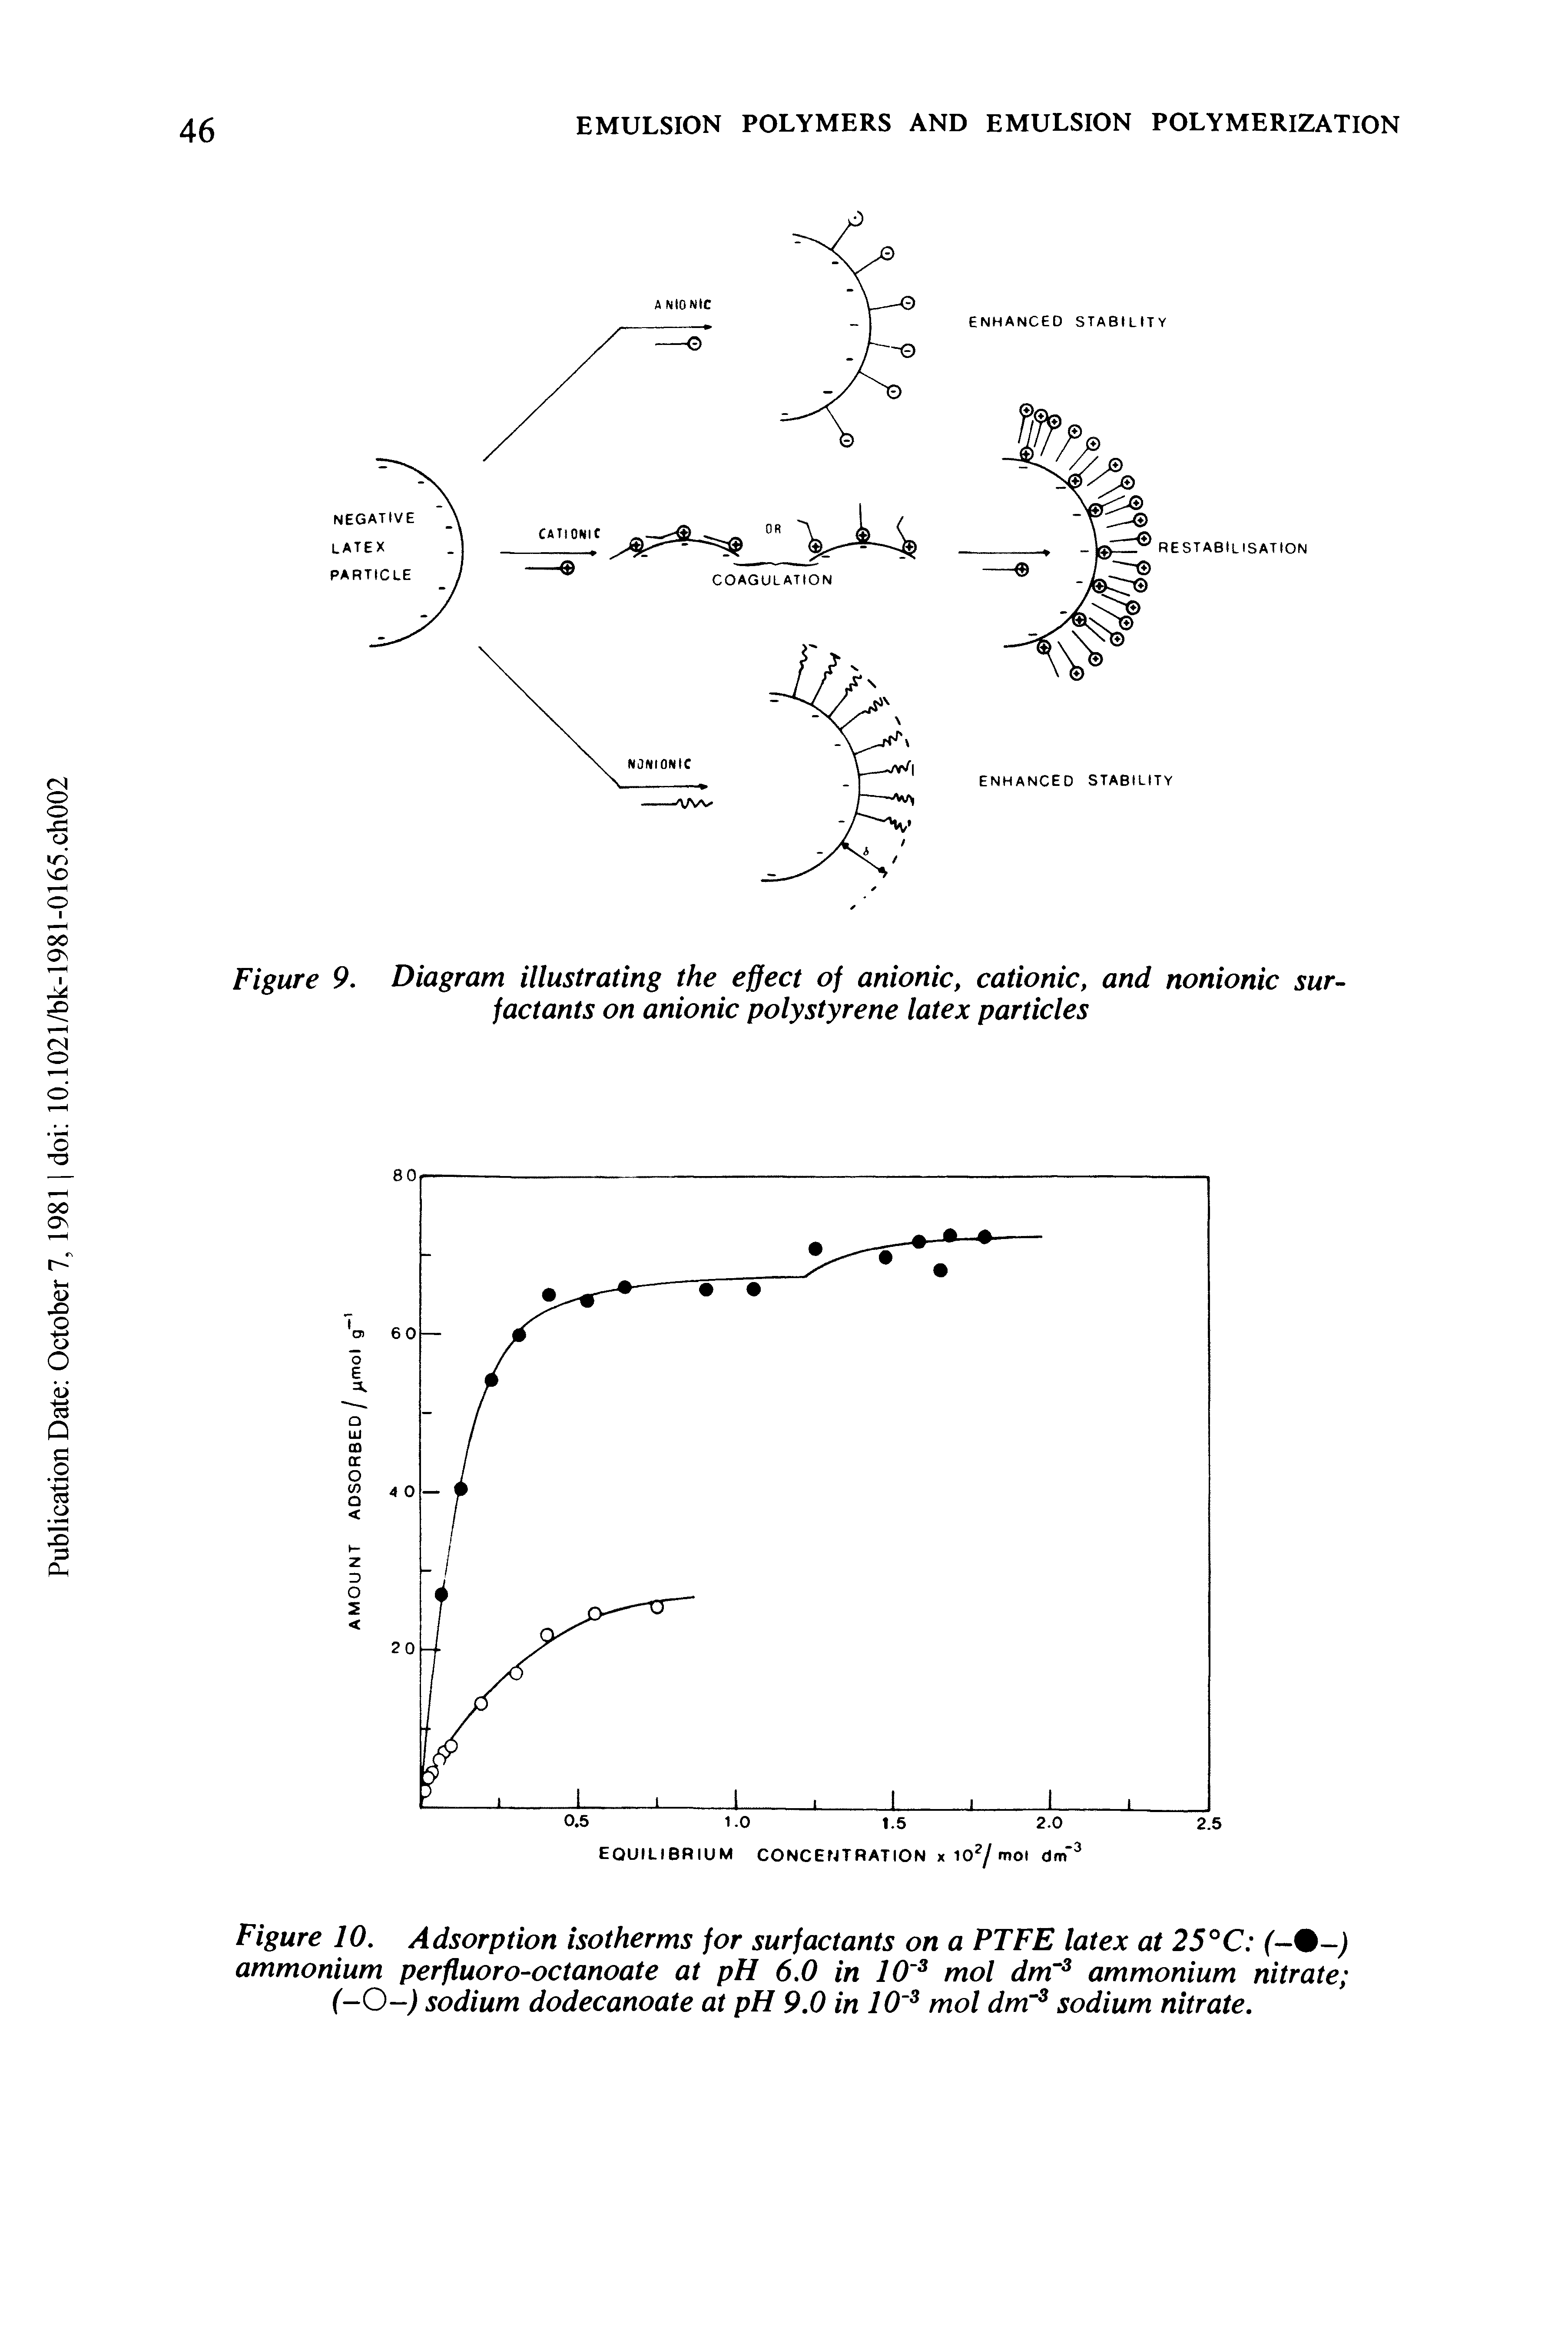 Figure 9. Diagram illustrating the effect of anionic, cationic, and nonionic surfactants on anionic polystyrene latex particles...